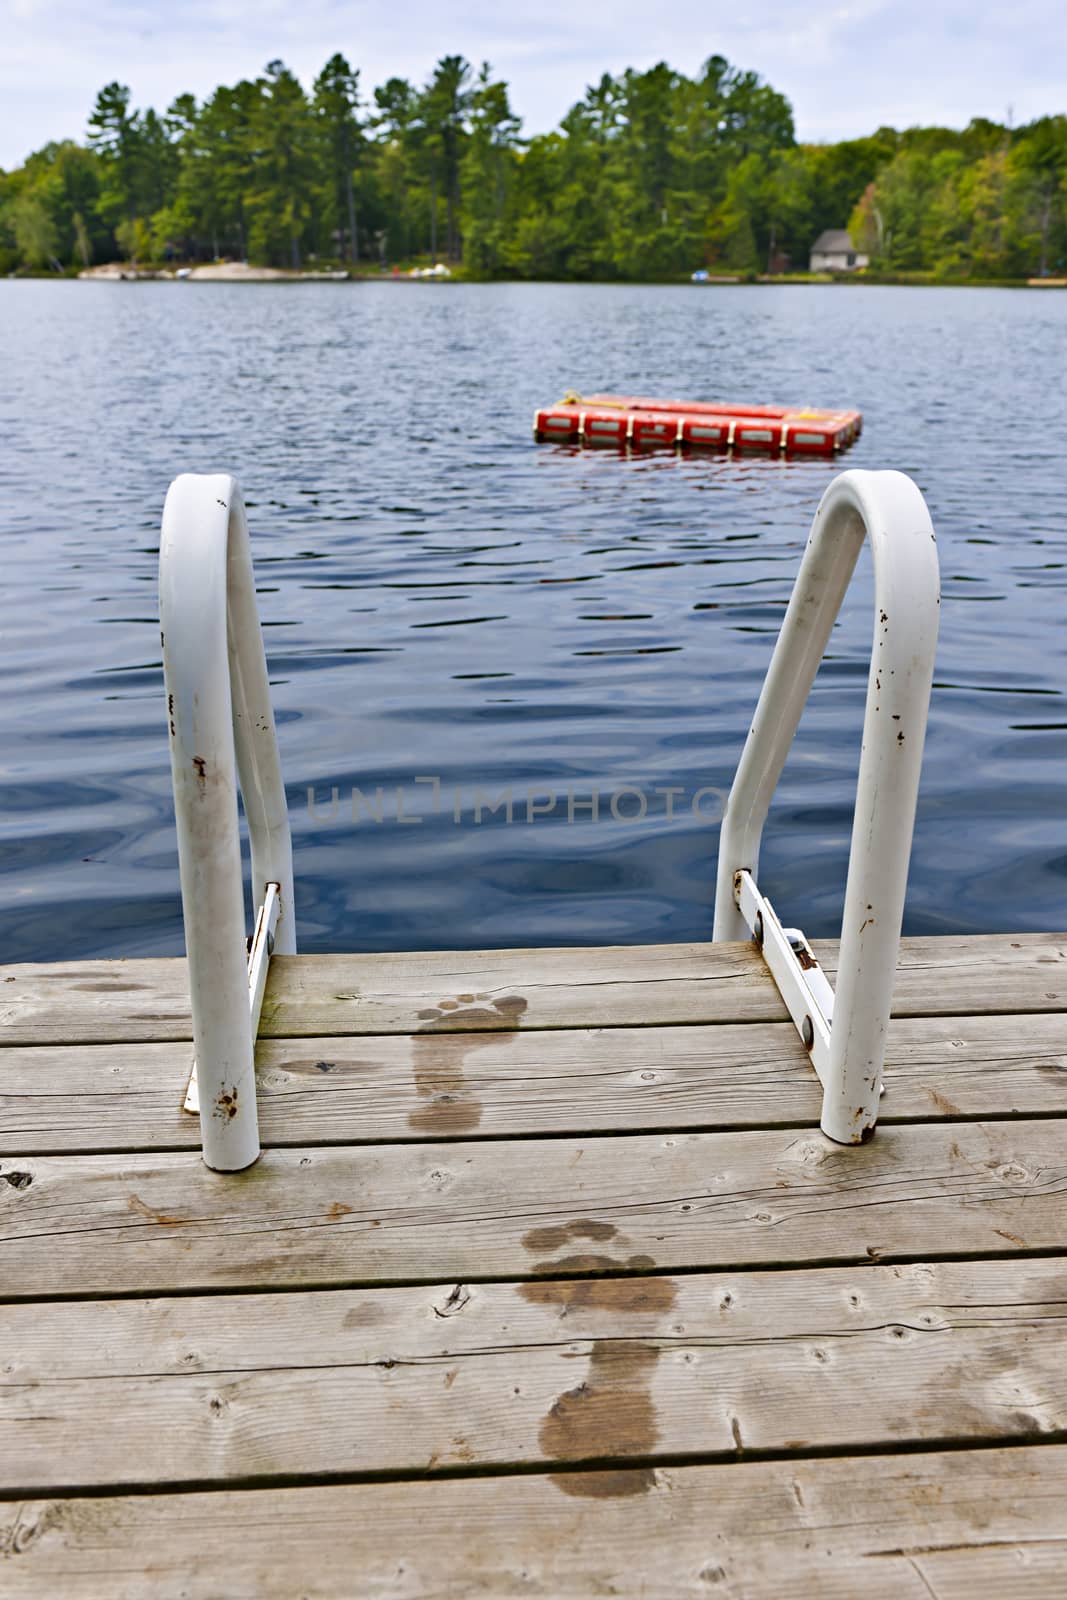 Wet footprints on dock with ladder and diving platform at lake in Ontario Canada